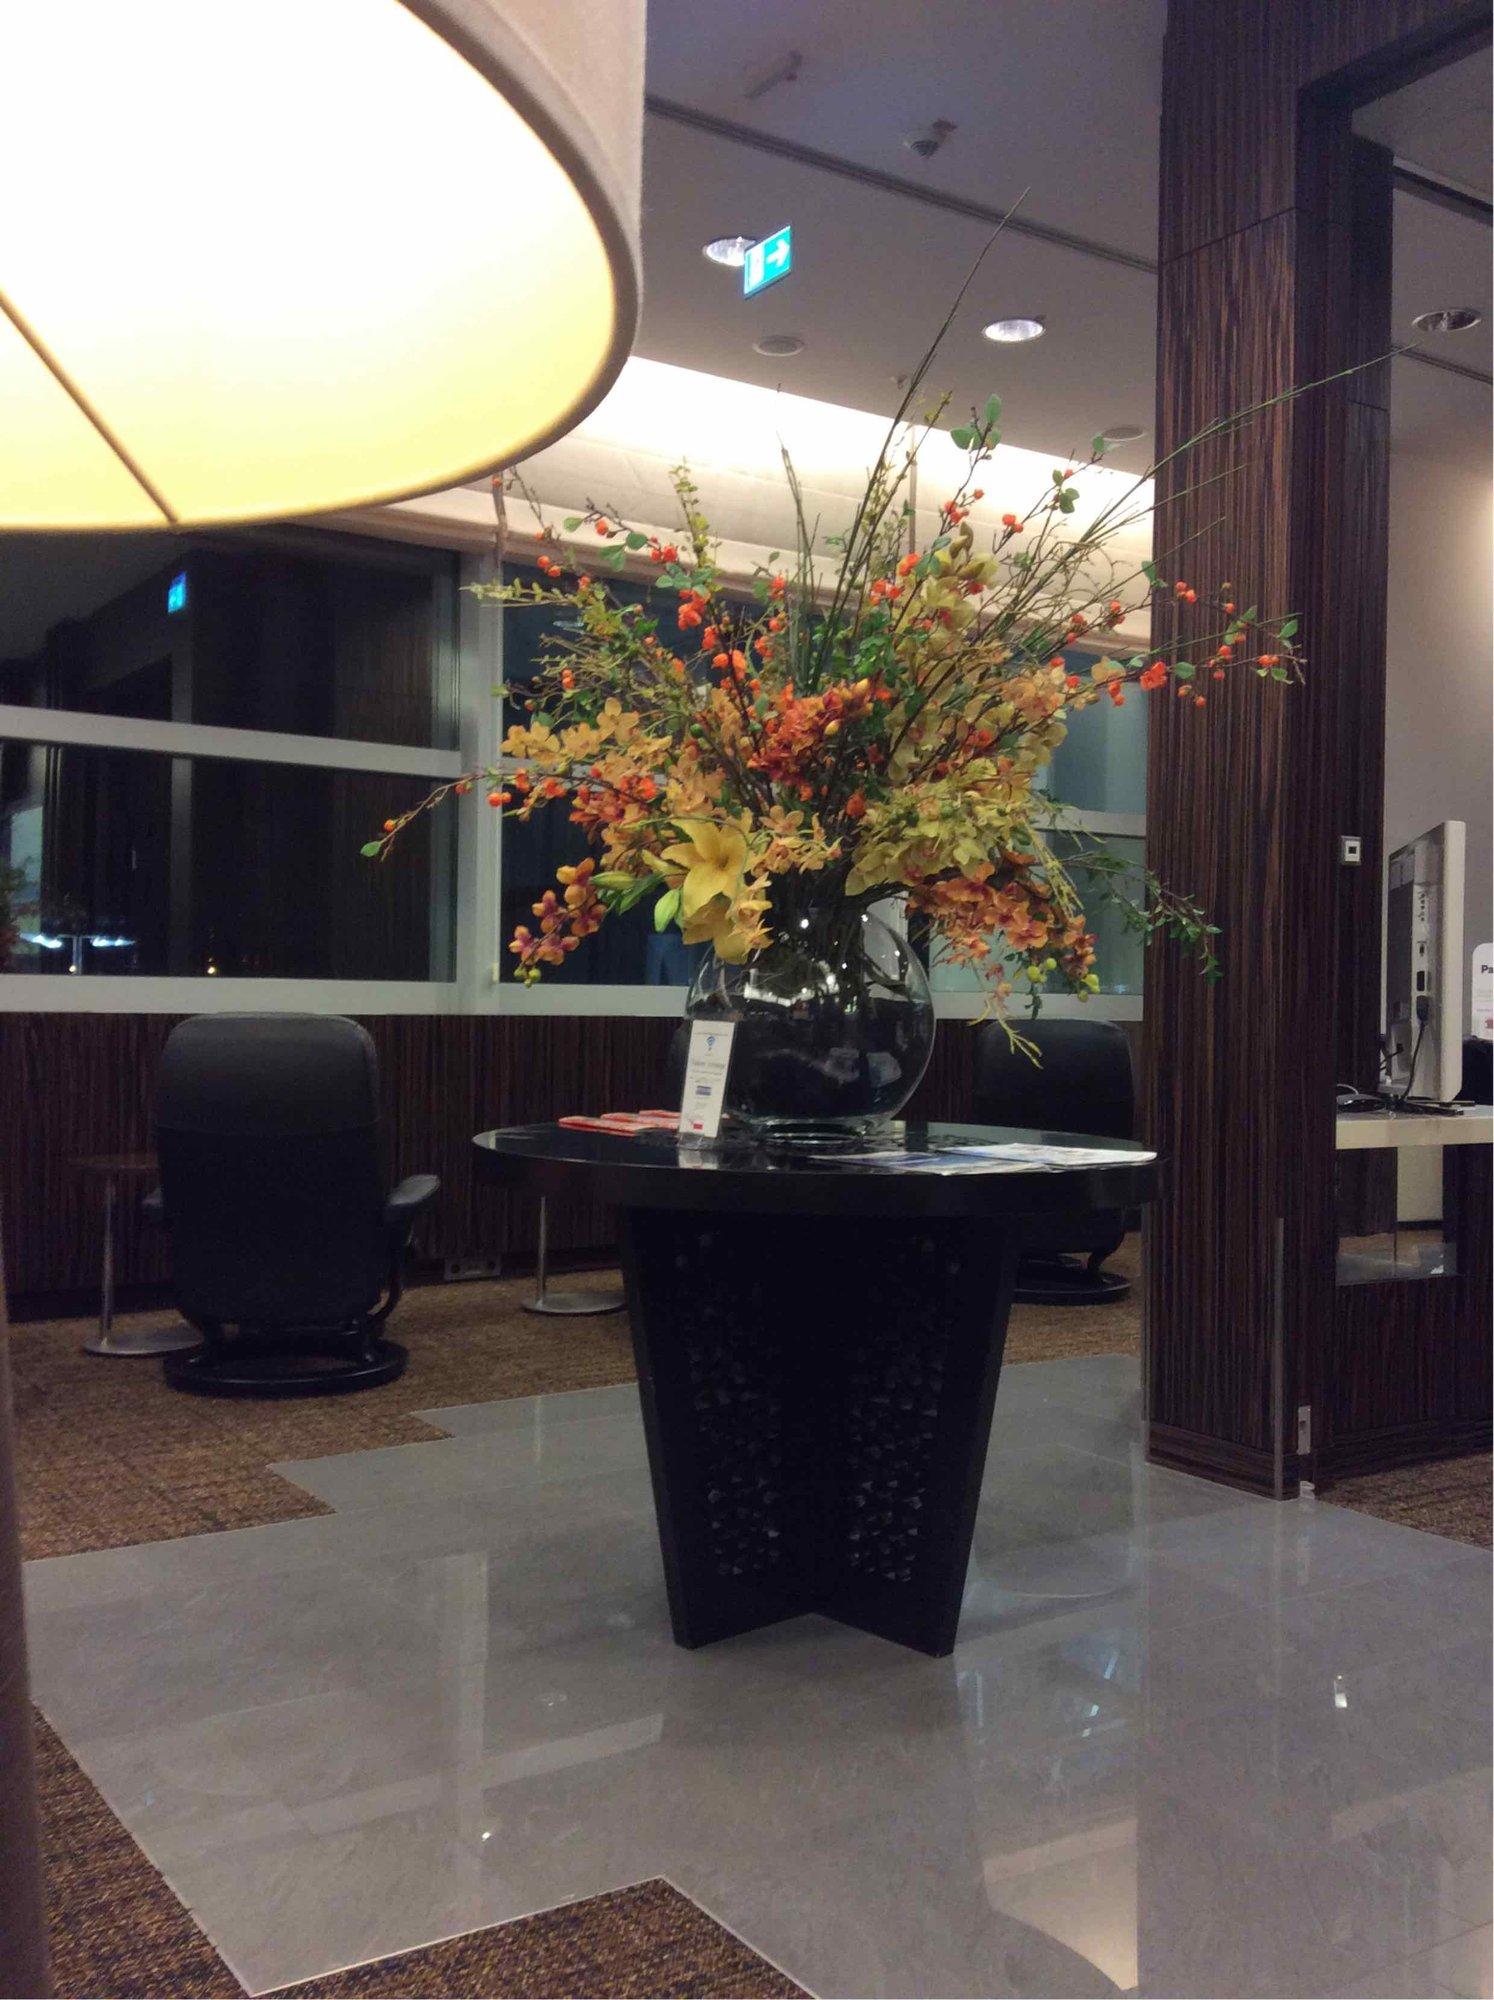 Japan Airlines JAL First Class Lounge image 6 of 10